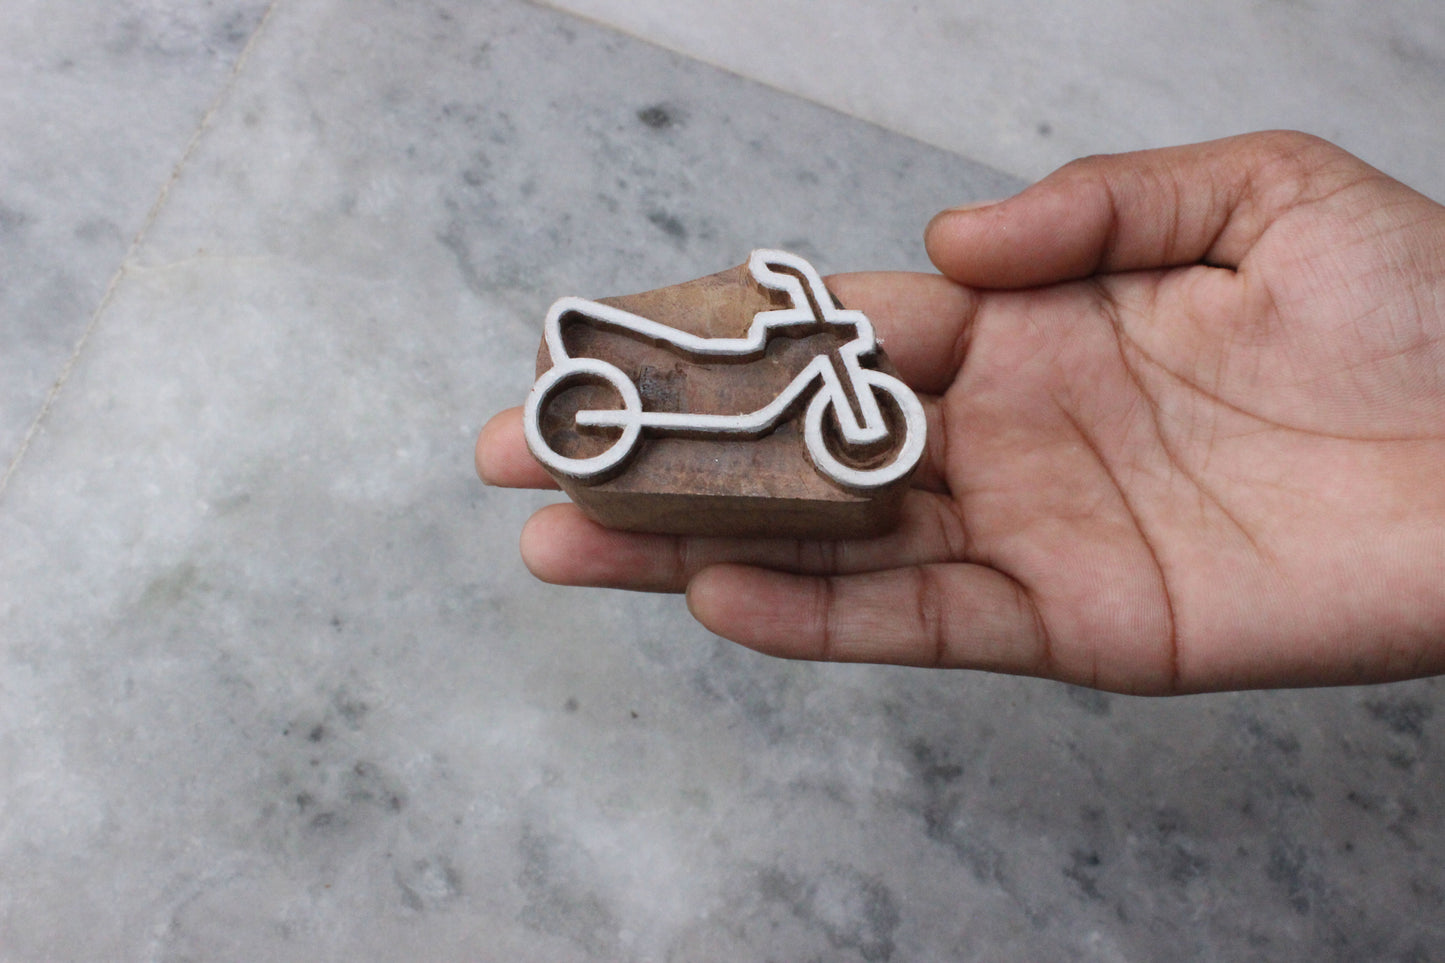 Bike Stamp Hand Carved Wood Block Stamp Vehicle Fabric Stamp Hand Carved Textile Printing Block For Printing Indian Soap Stamp Traditional Wooden Printing Block